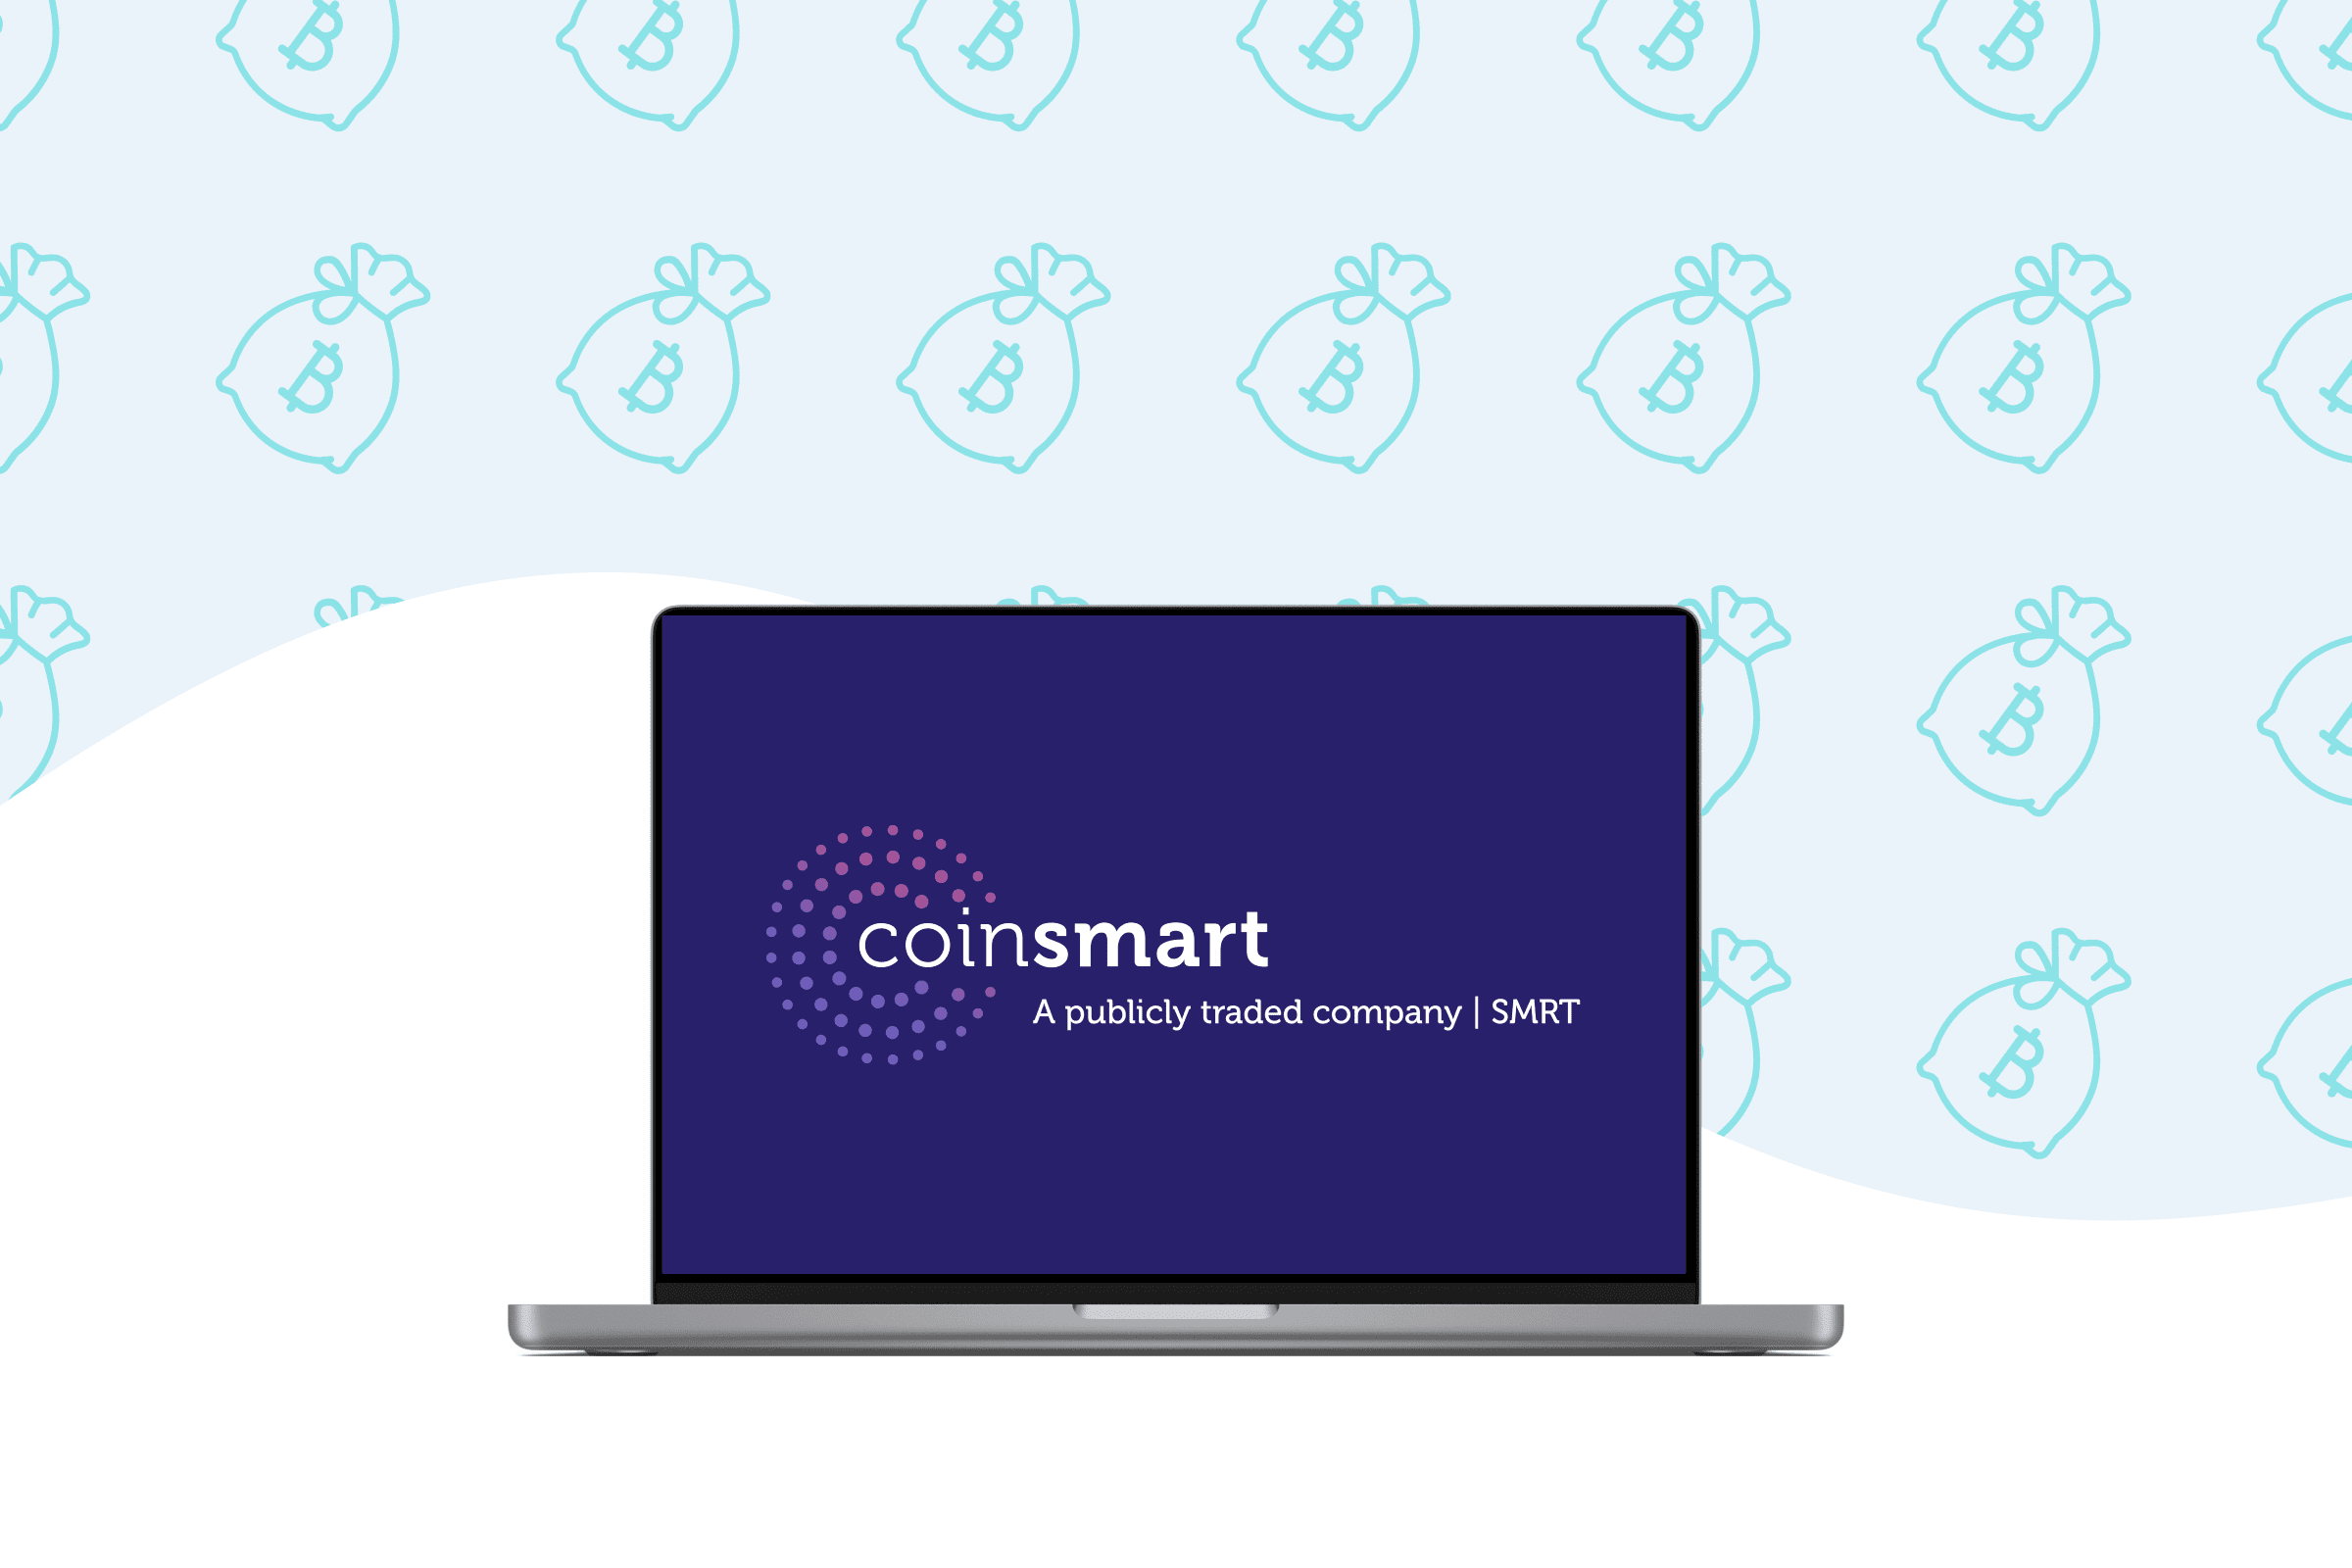 A platform for trading cryptocurrencies, coinsmart enables users to engage in cryptocurrency trading effortlessly.